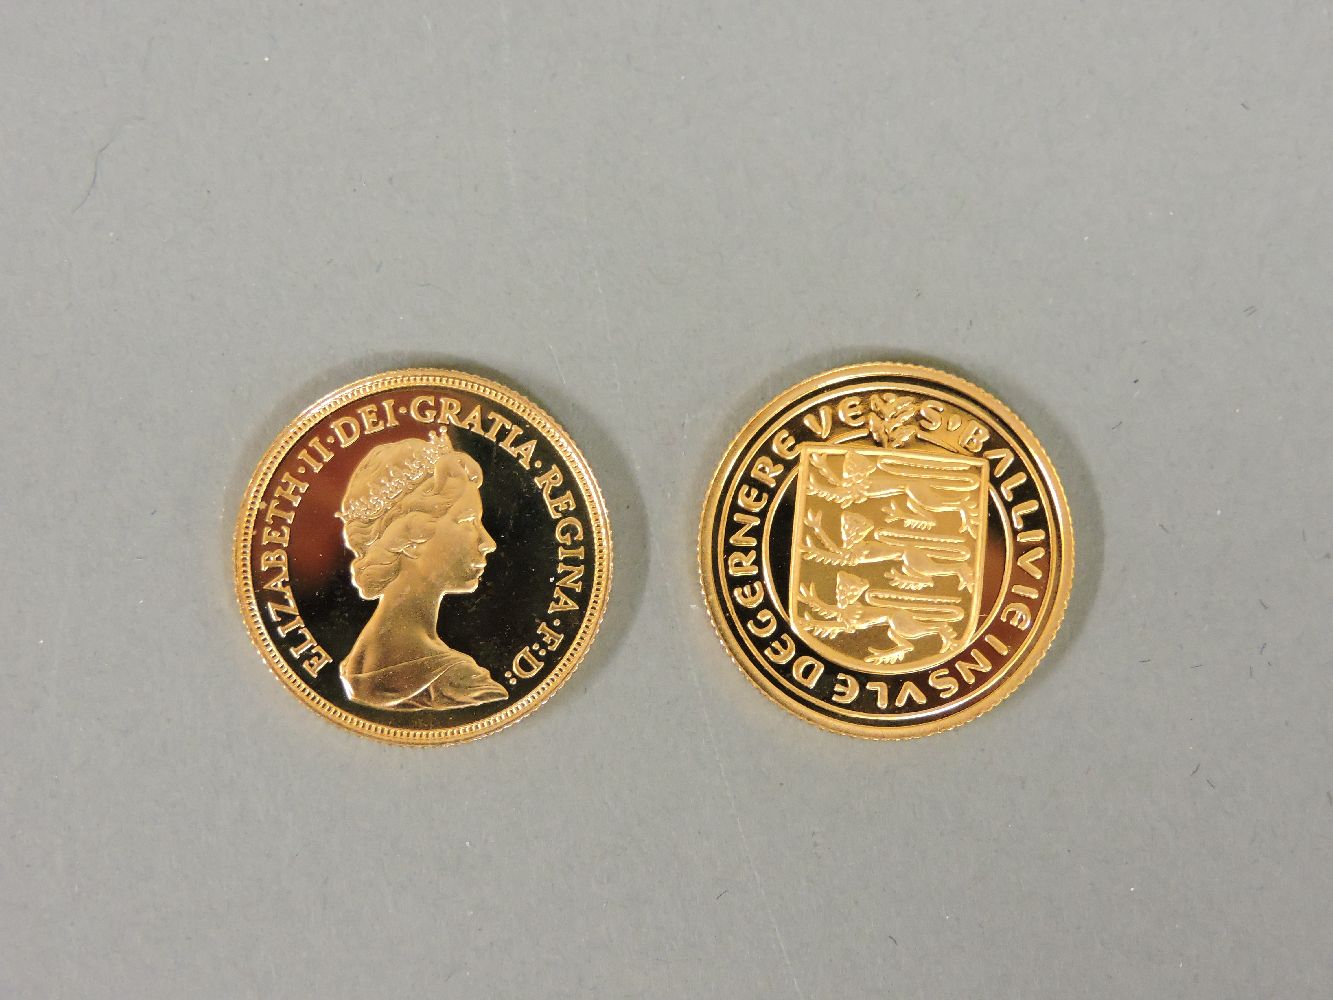 A 1980 proof gold sovereign, together with a 1981 Guernsey gold one pound coin - Image 2 of 3